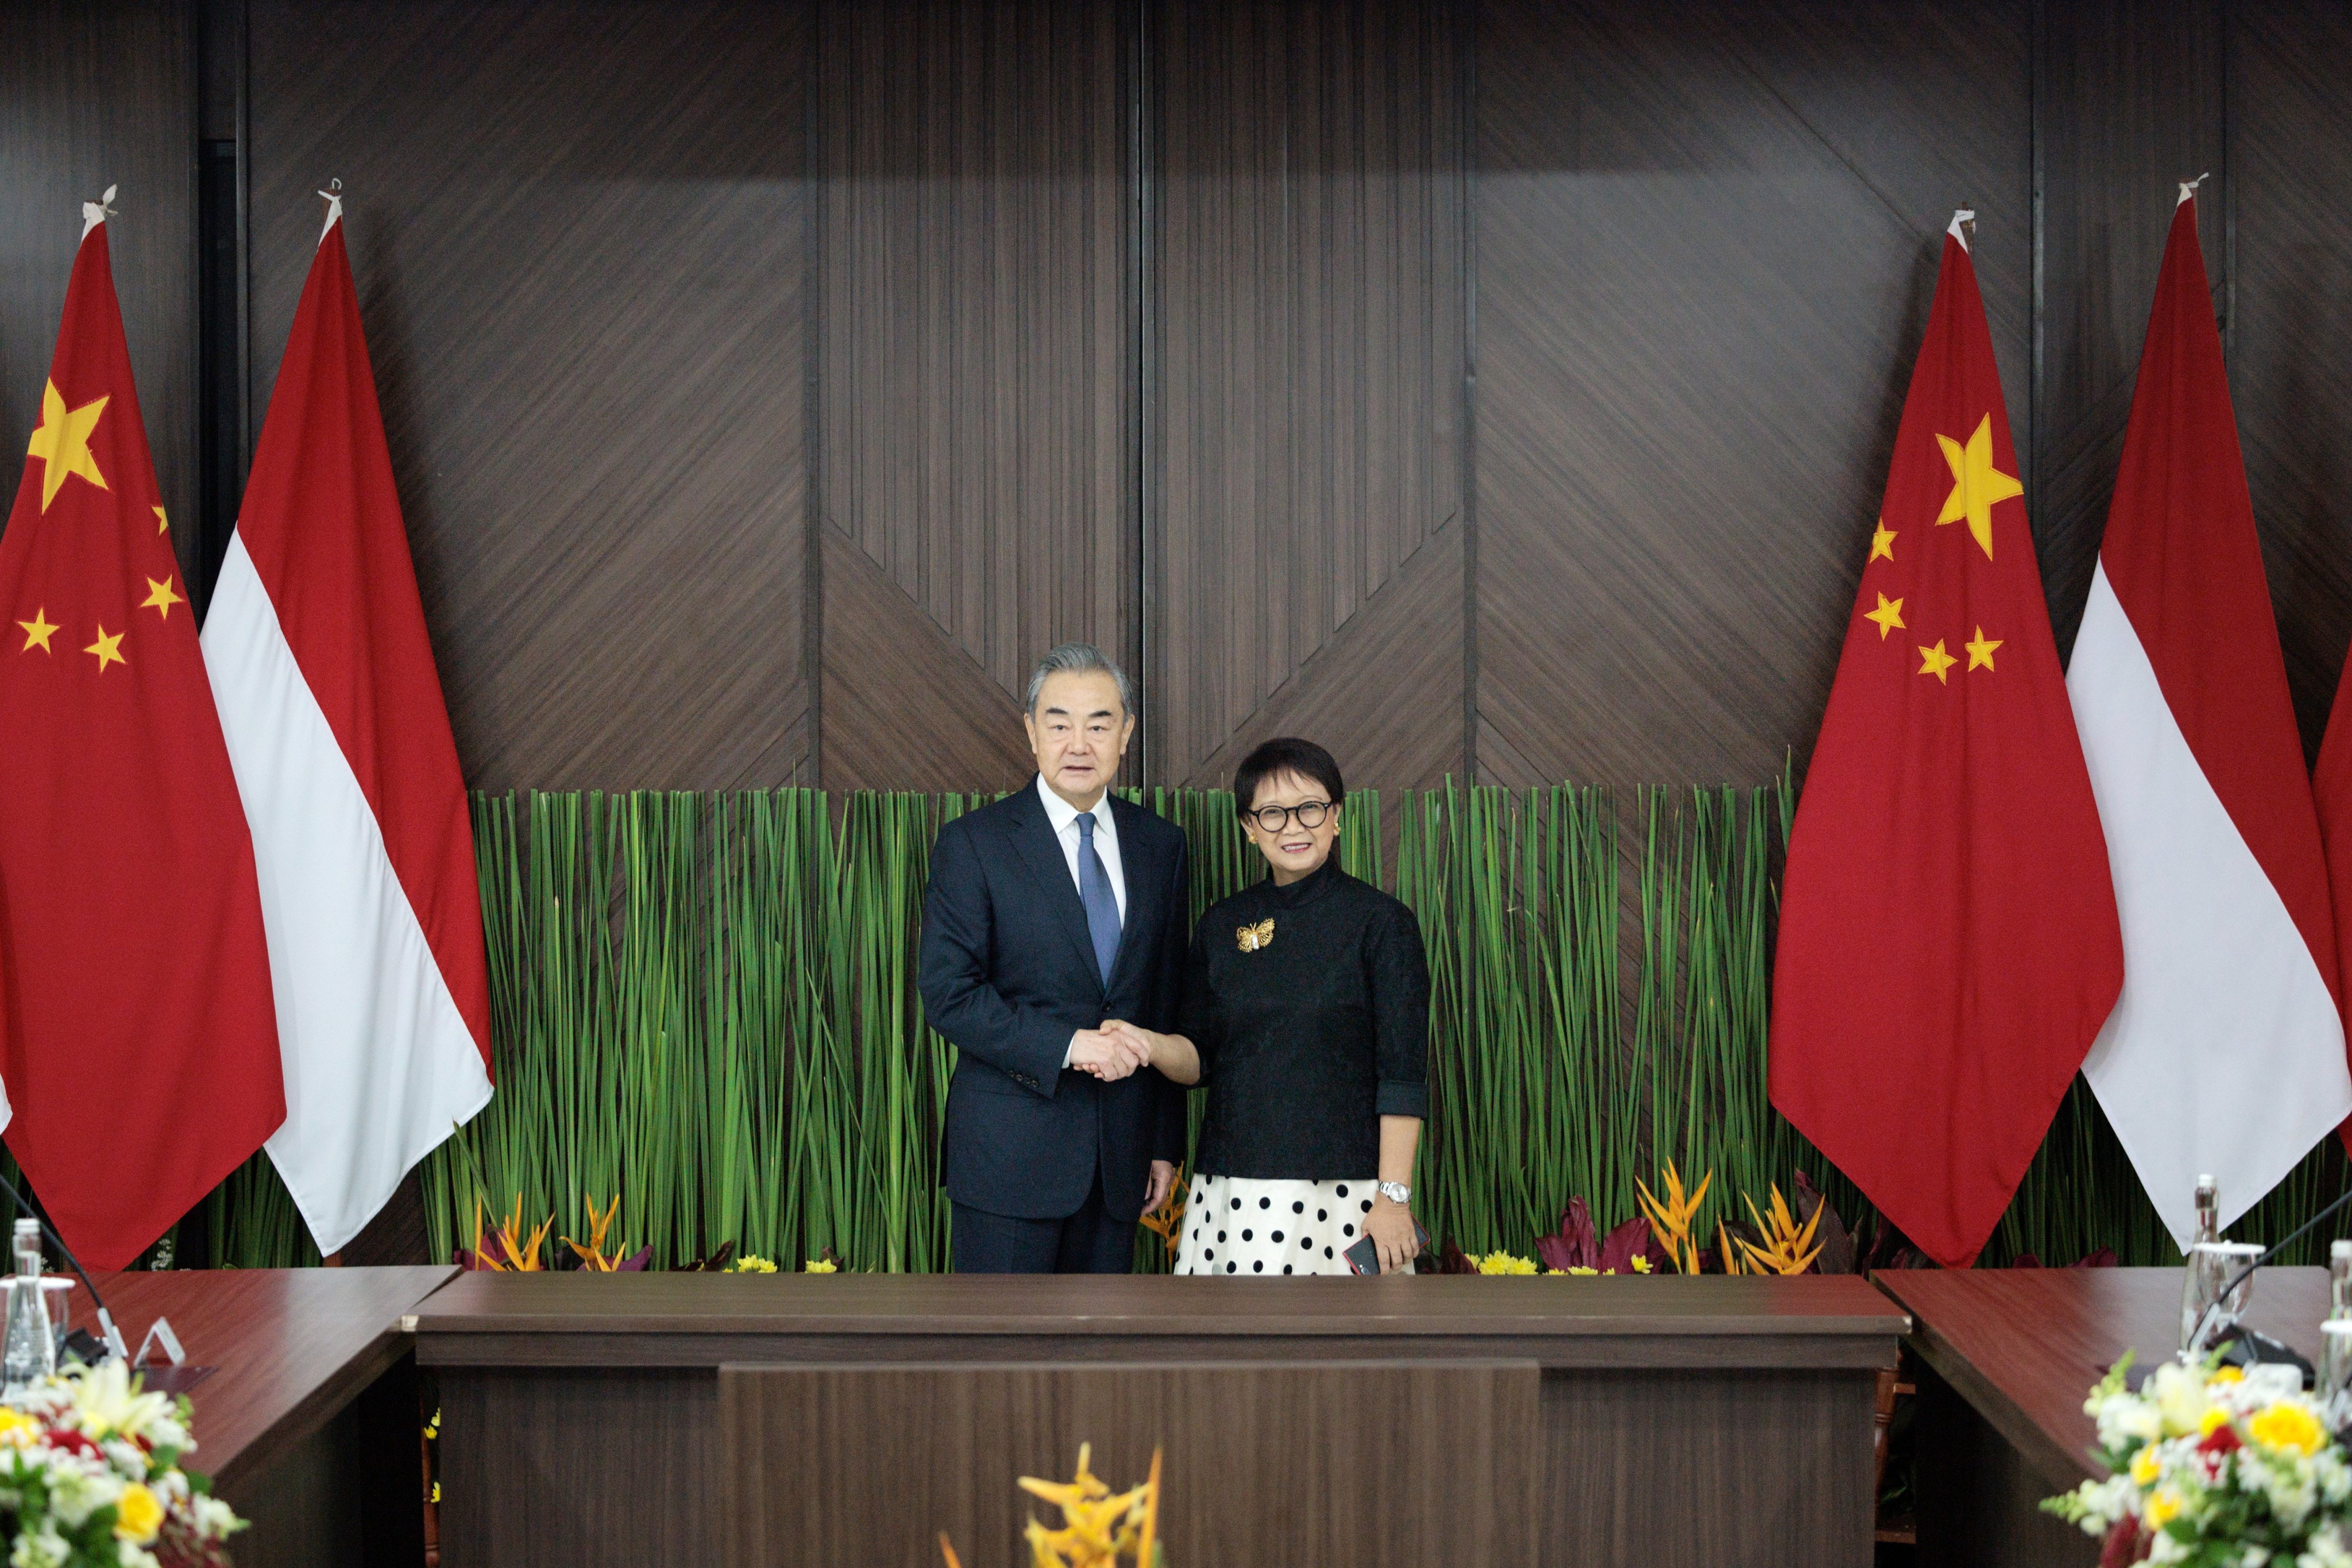 Indonesian Foreign Minister Retno Marsudi welcomes her Chinese counterpart Wang Yi at the start of his visit to Indonesia.  Photo: EPA-EFE